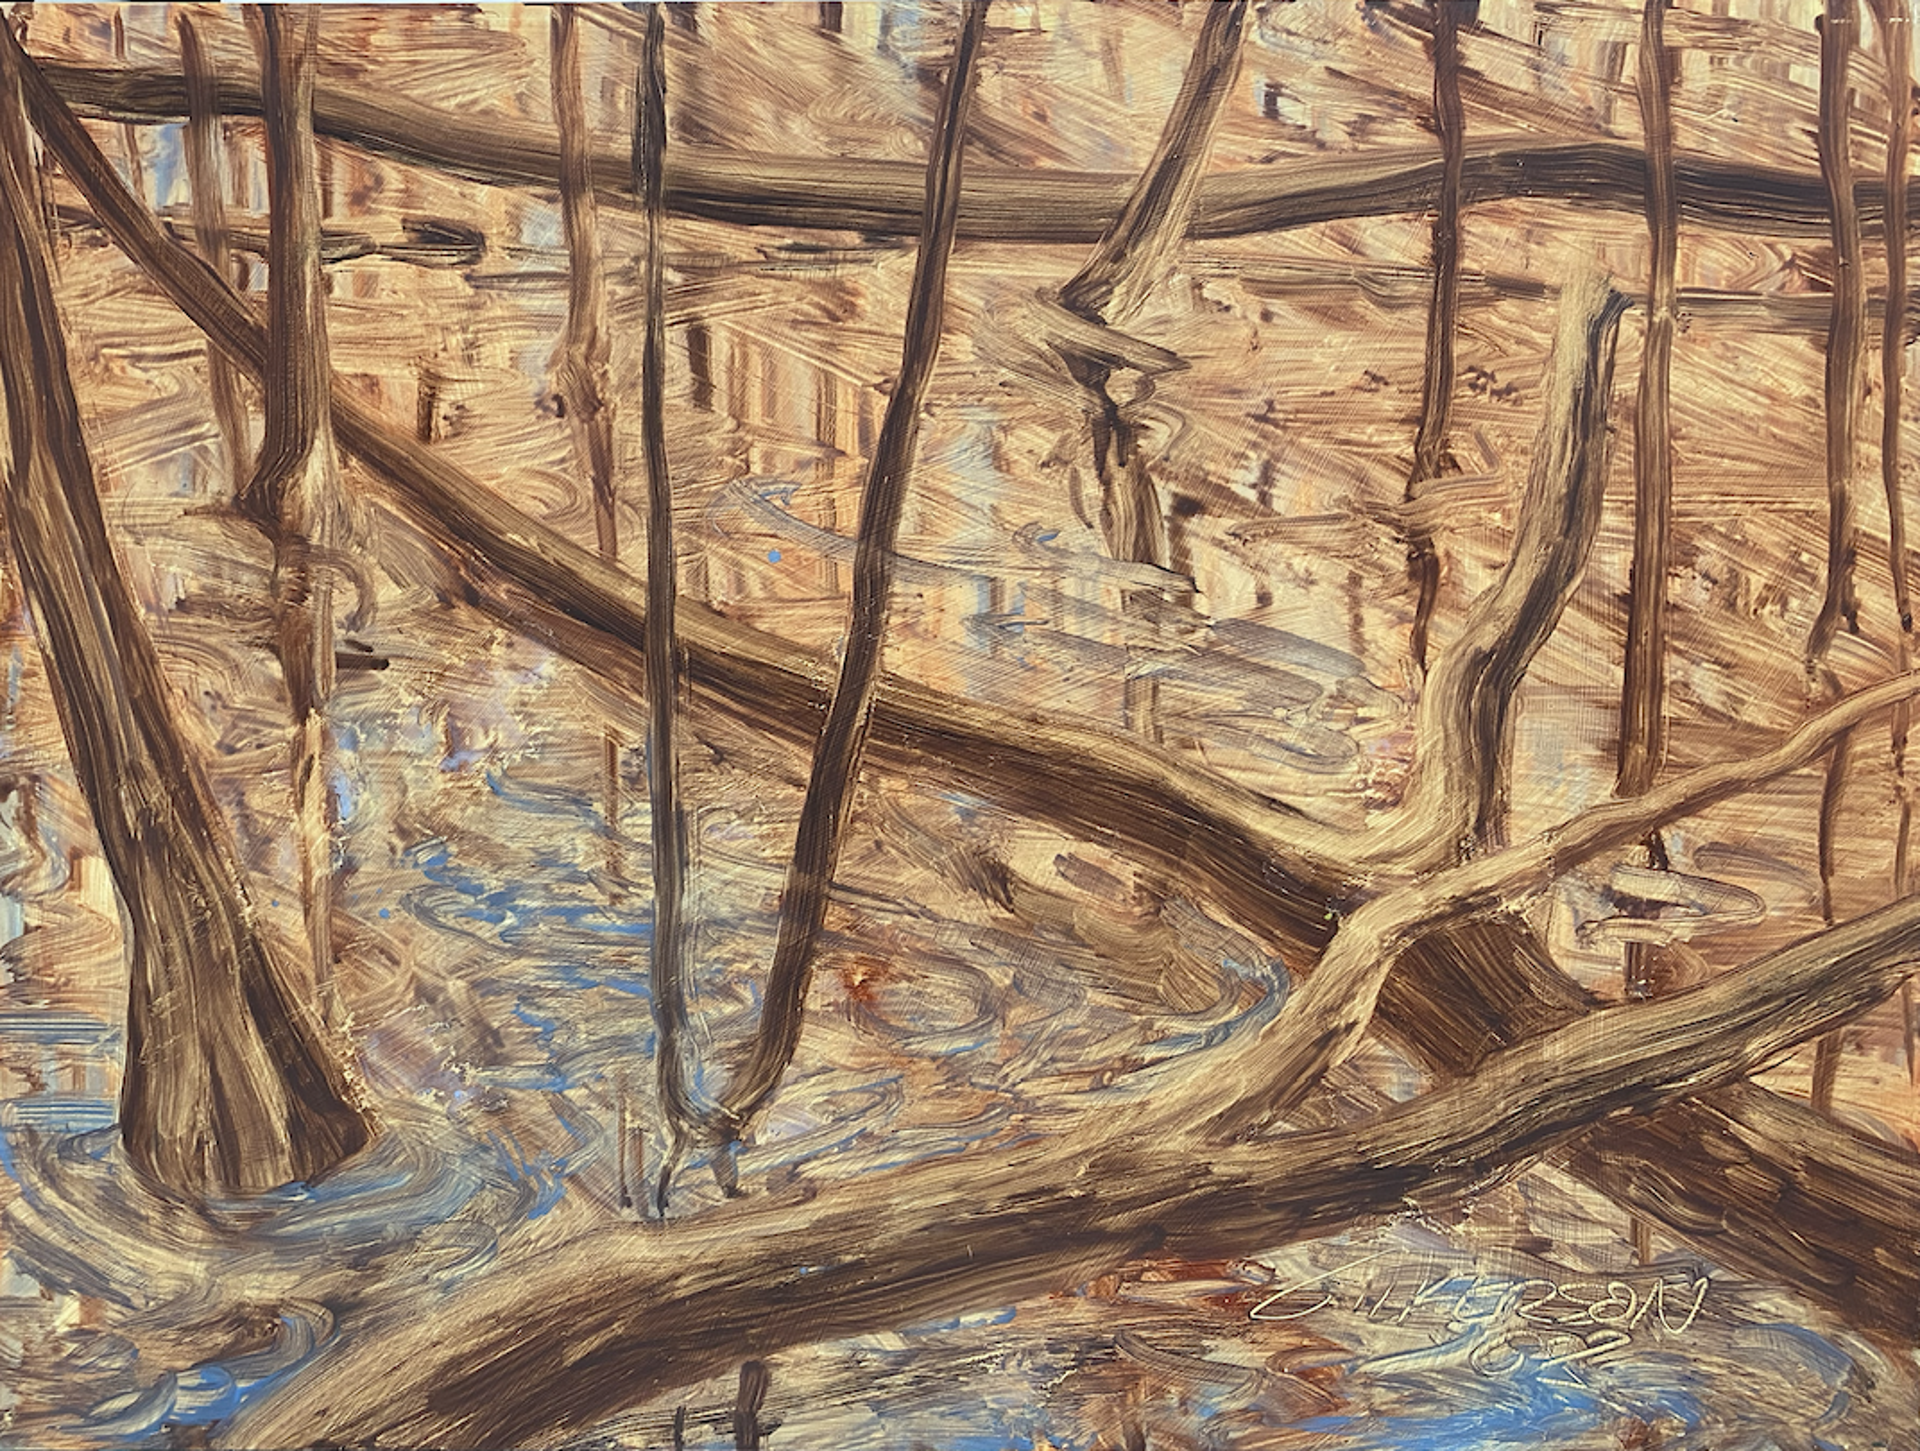 Congaree #5 by Mary Gilkerson